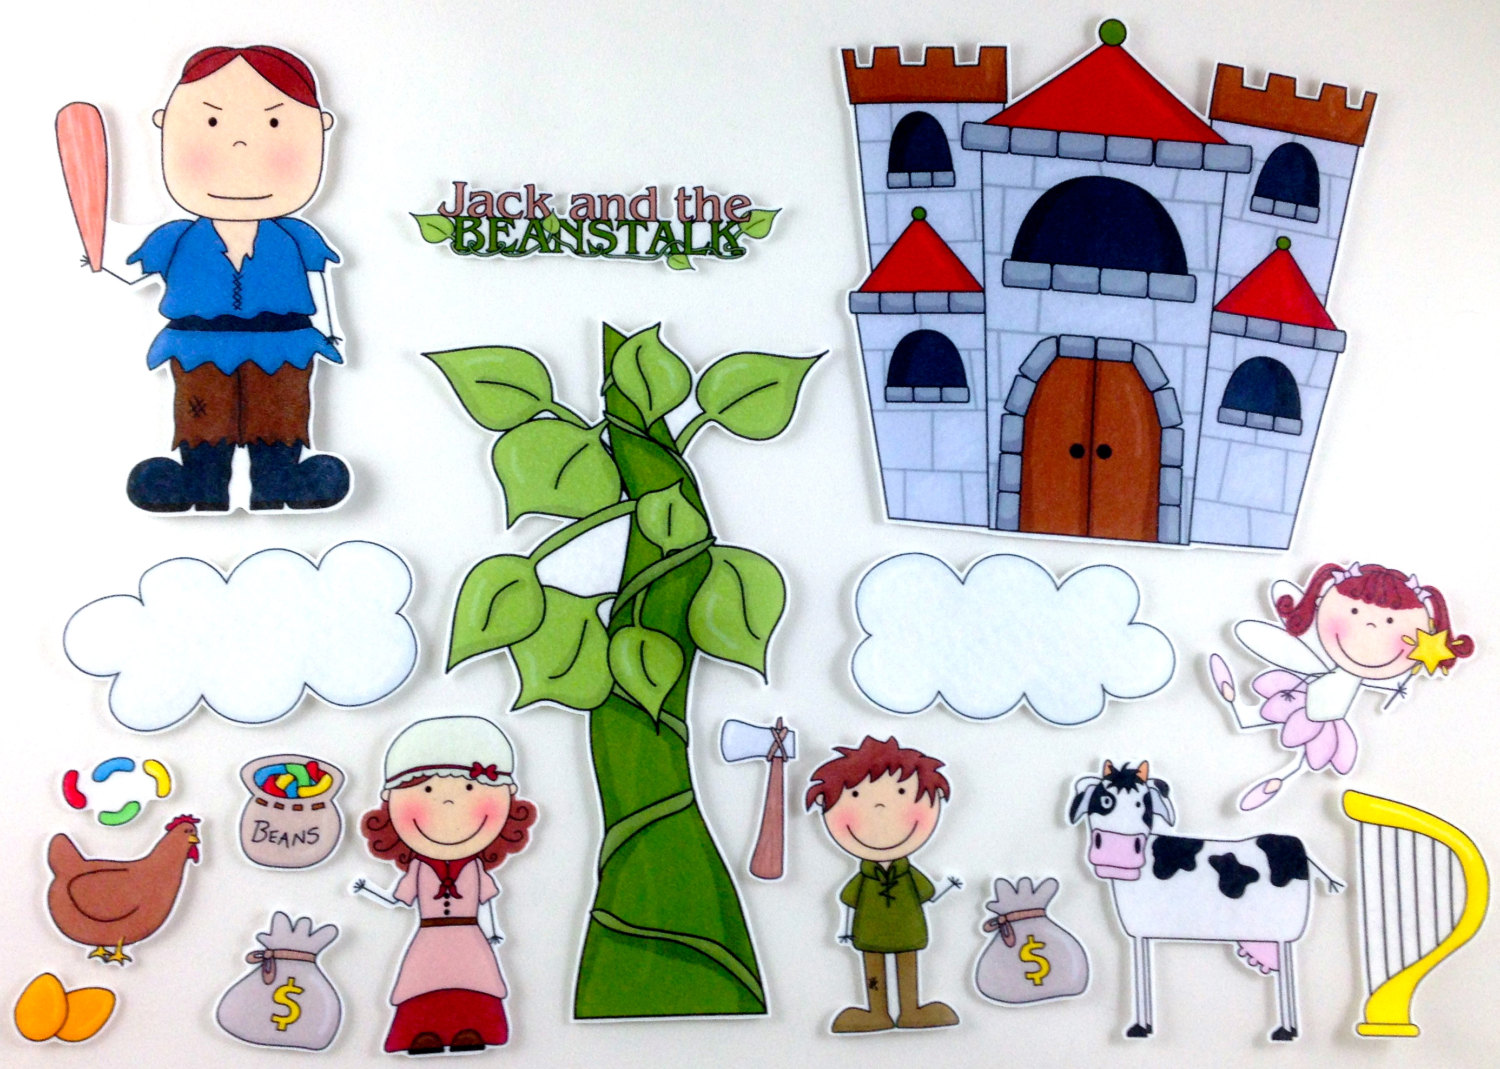 free-jack-and-the-beanstalk-characters-download-free-jack-and-the-beanstalk-characters-png